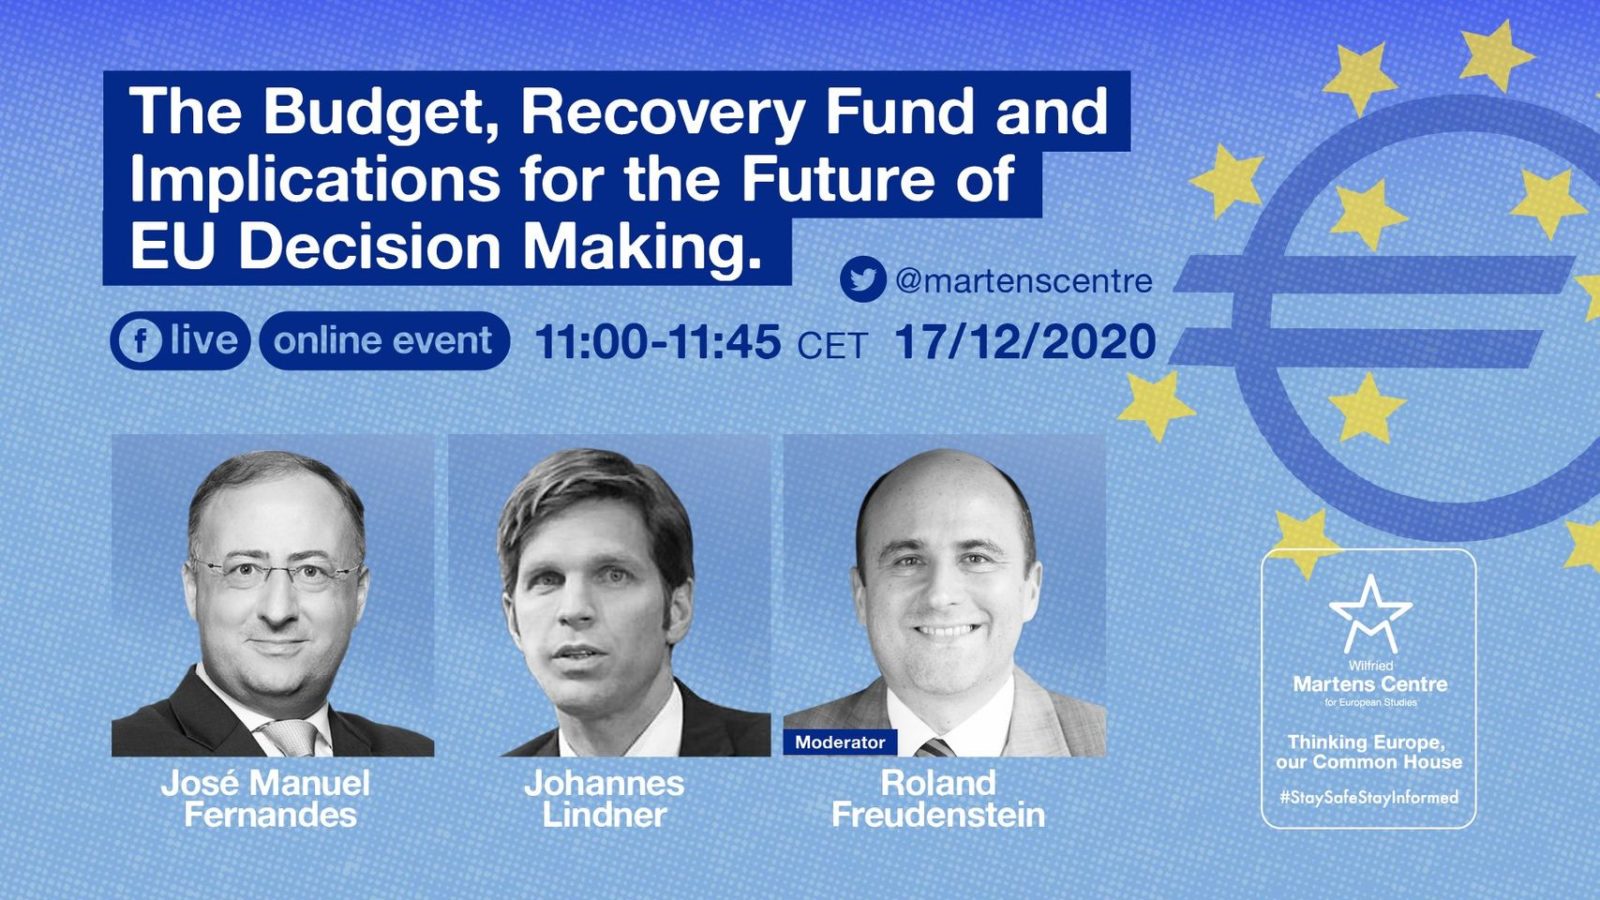 The Budget, Recovery Fund and Implications for the Future of EU Decision Making